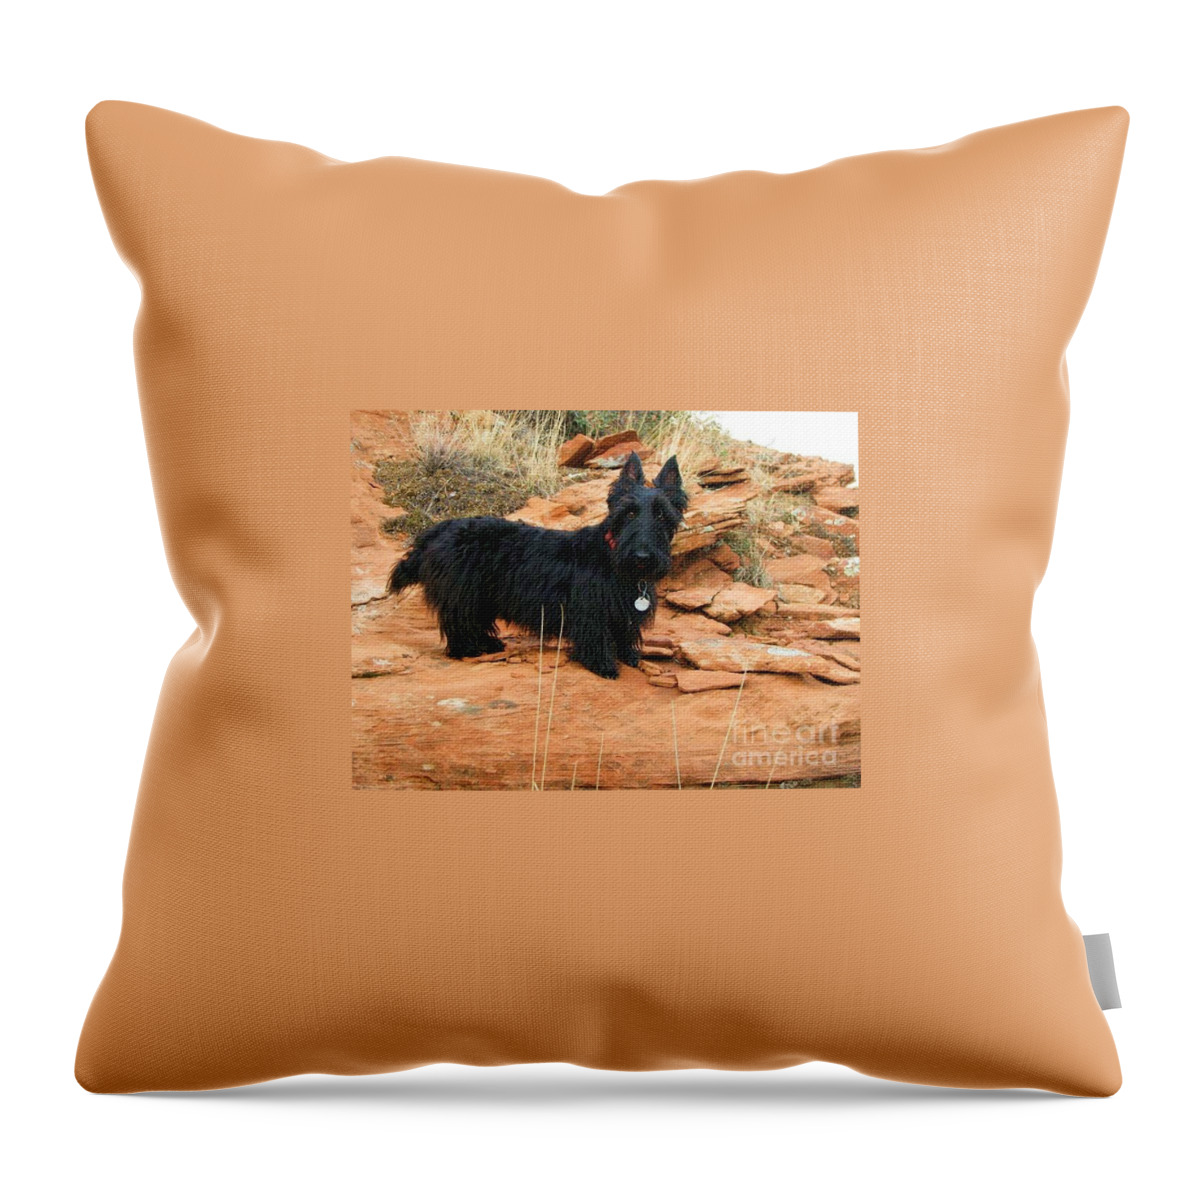 Scottish Terrier Throw Pillow featuring the photograph Black Dog Red Rock by Michele Penner